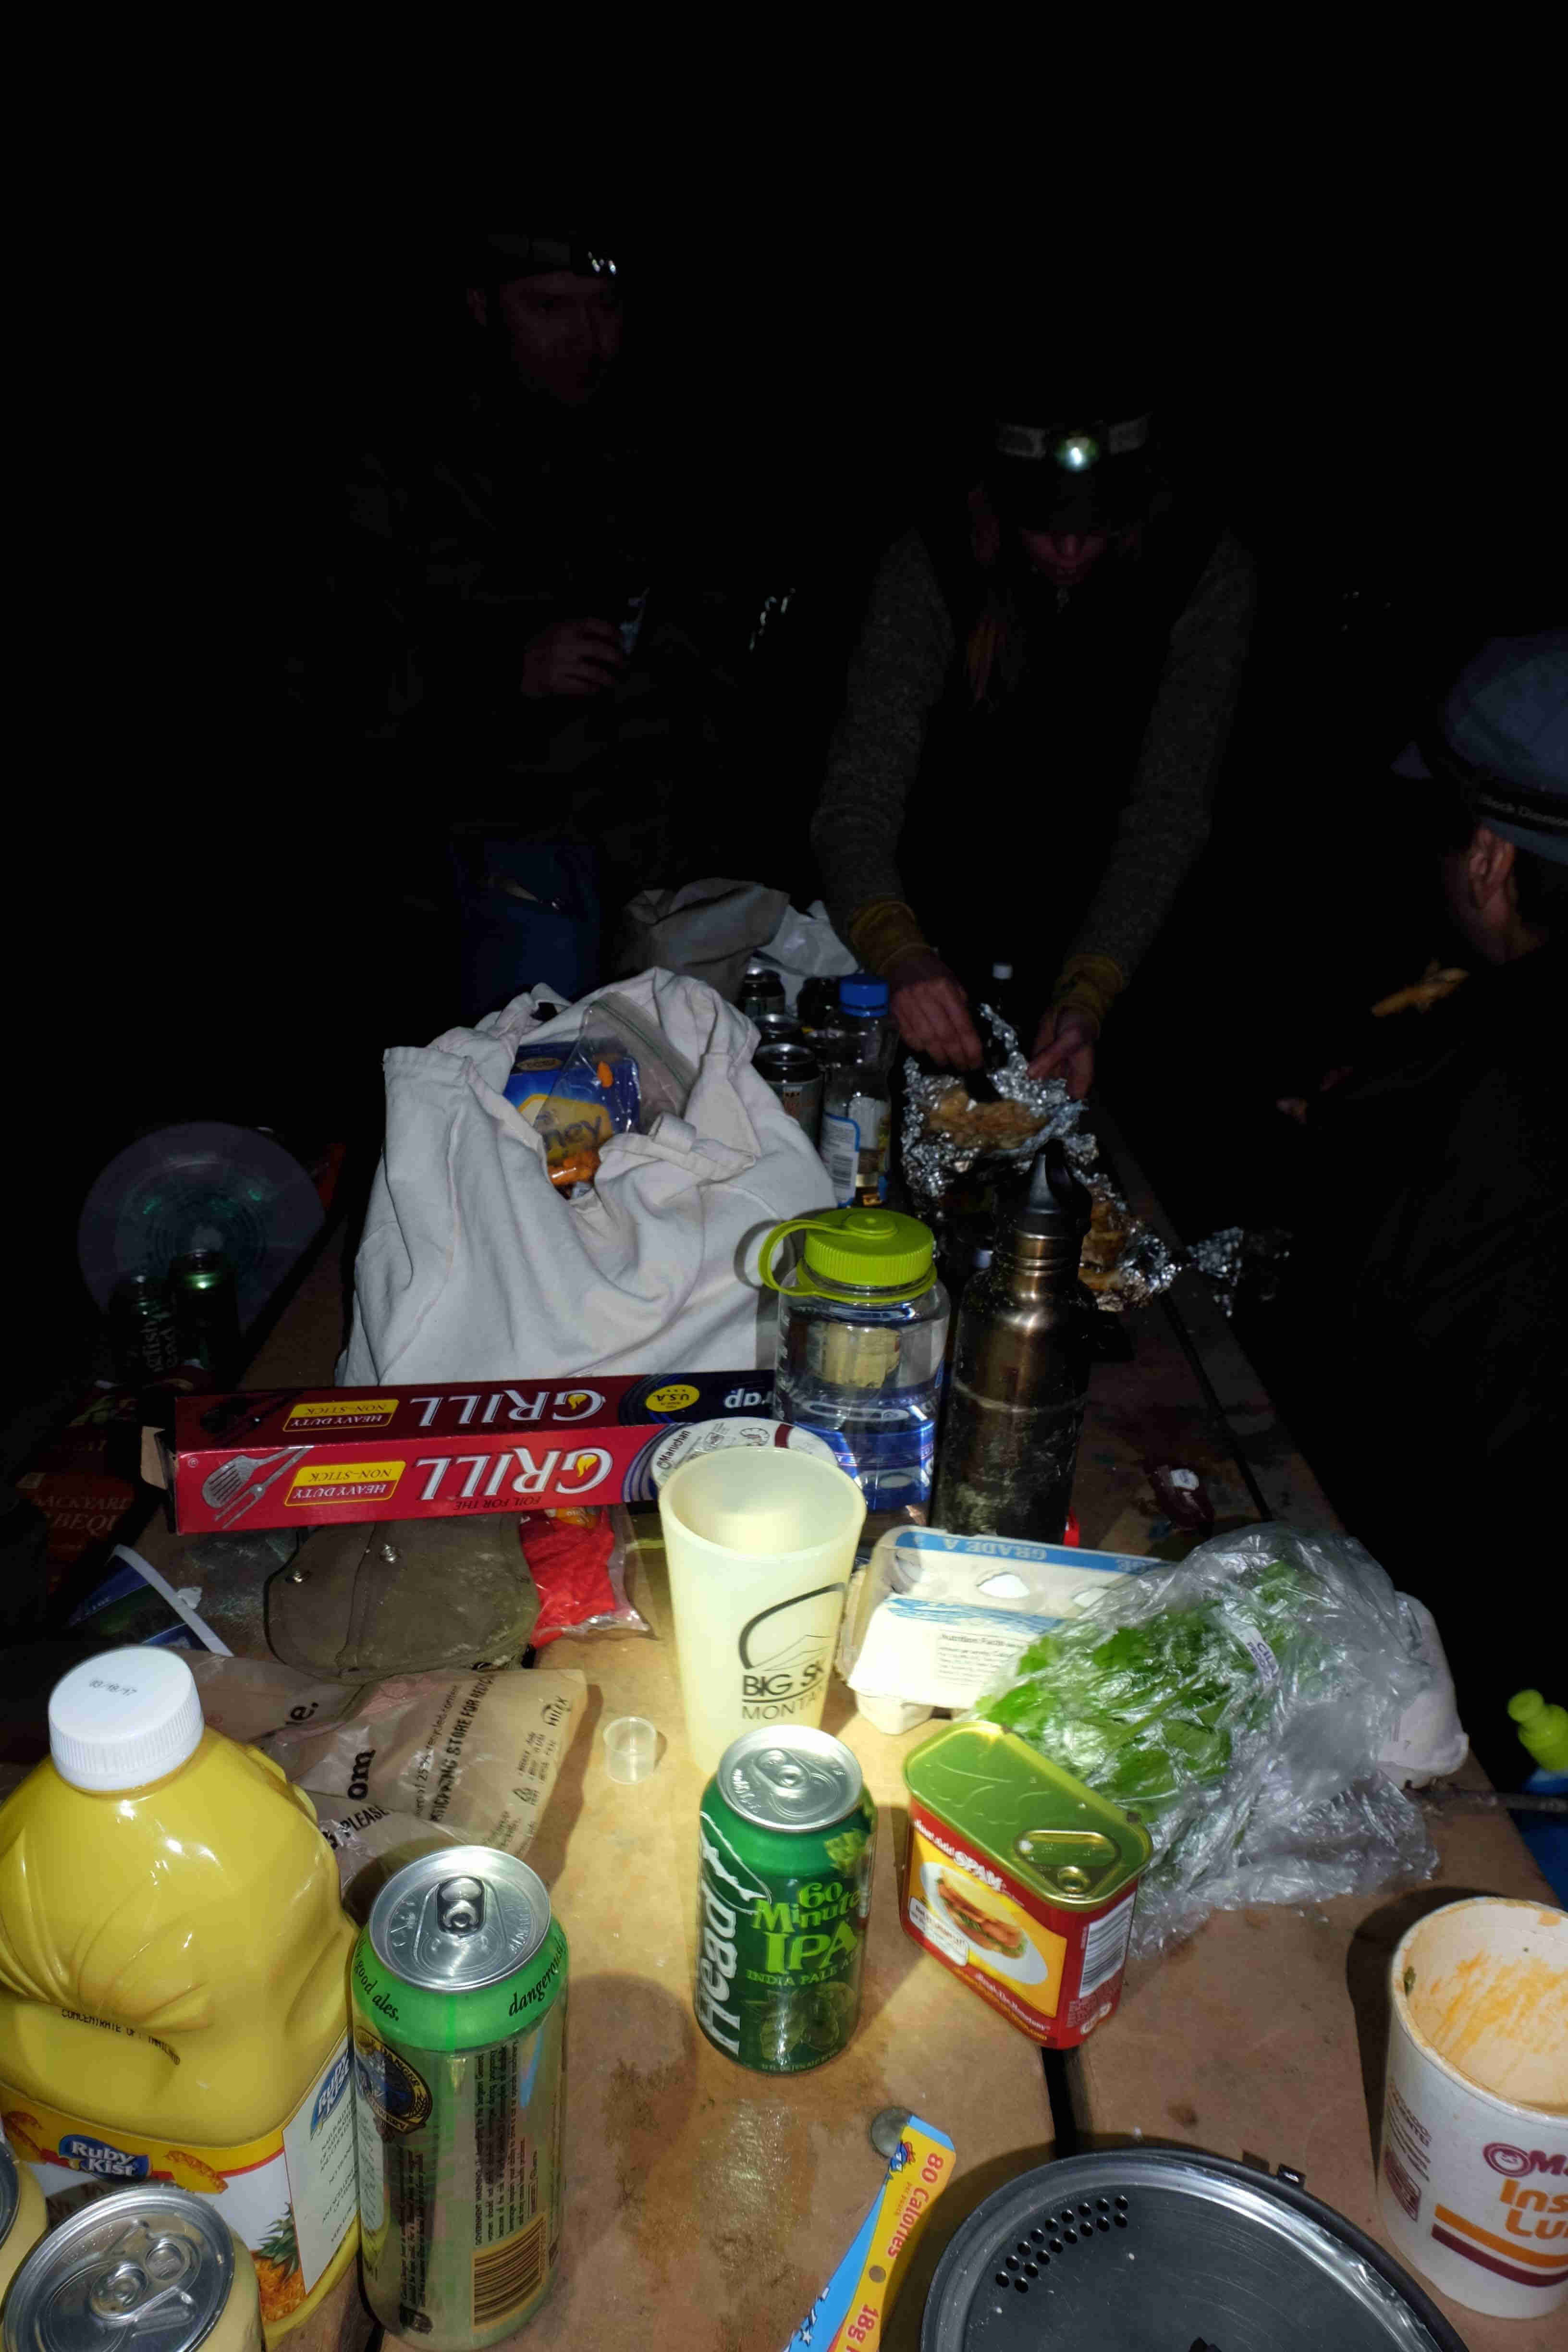 A picnic table covered in food and drink items, in the dark at night